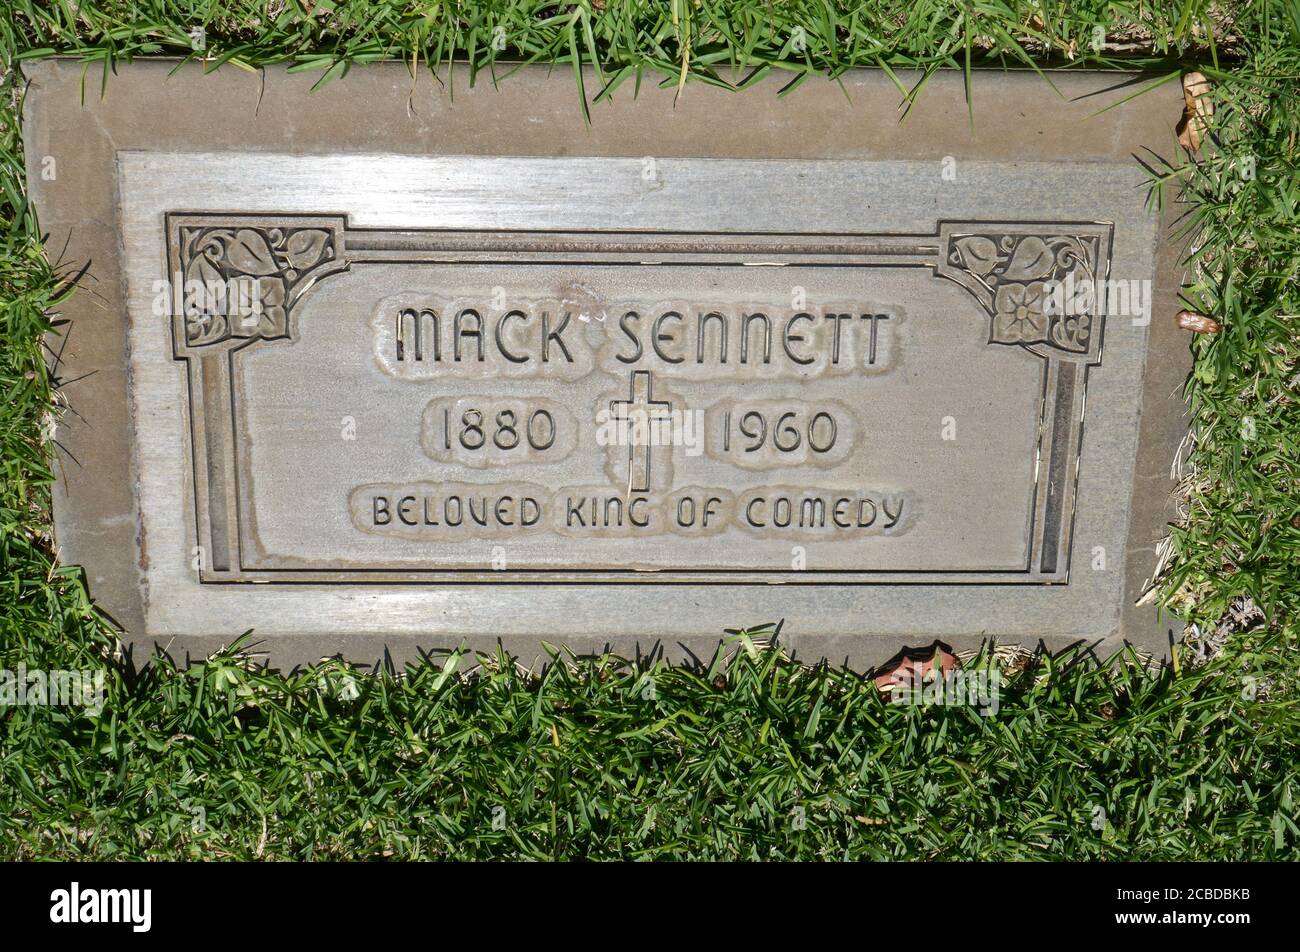 Culver City, California, USA 11th August 2020 A general view of atmosphere of actor/director Mack Sennett's Grave at Holy Cross Cemetery on August 11, 2020 in Culver City, California, USA. Photo by Barry King/Alamy Stock Photo Stock Photo